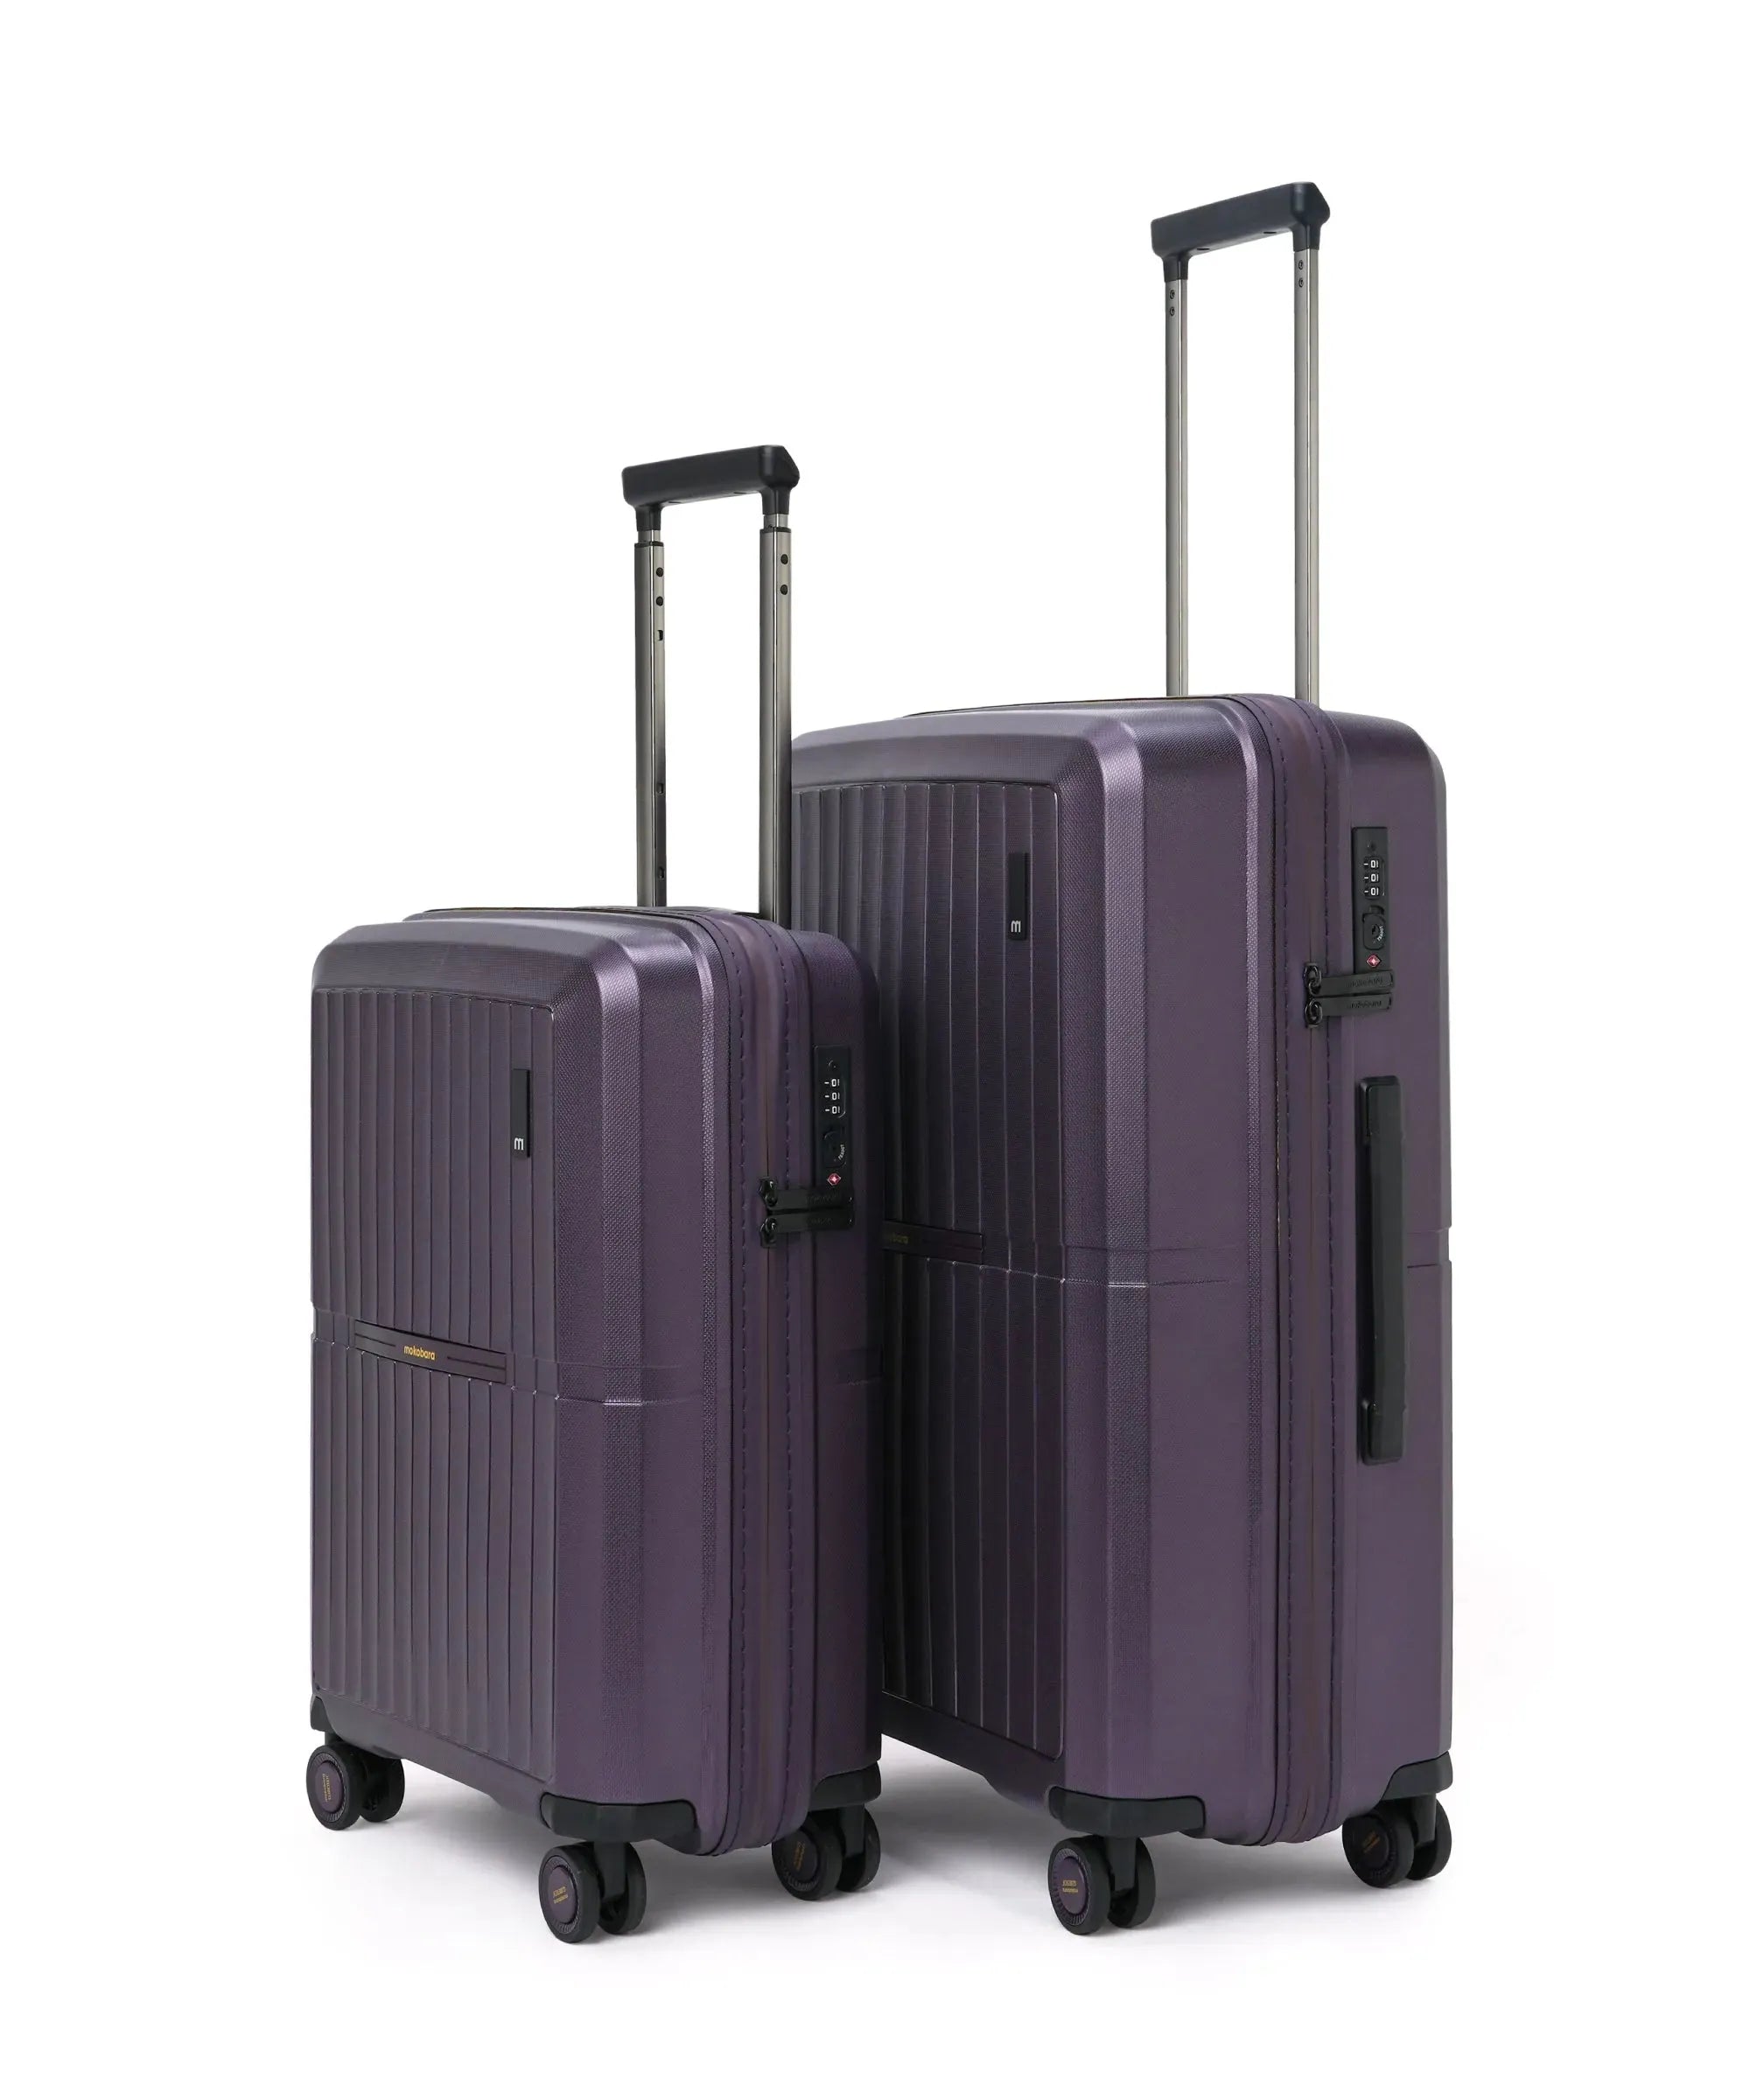 Color_Dark Matter | The Aviator Set of 2 Luggage